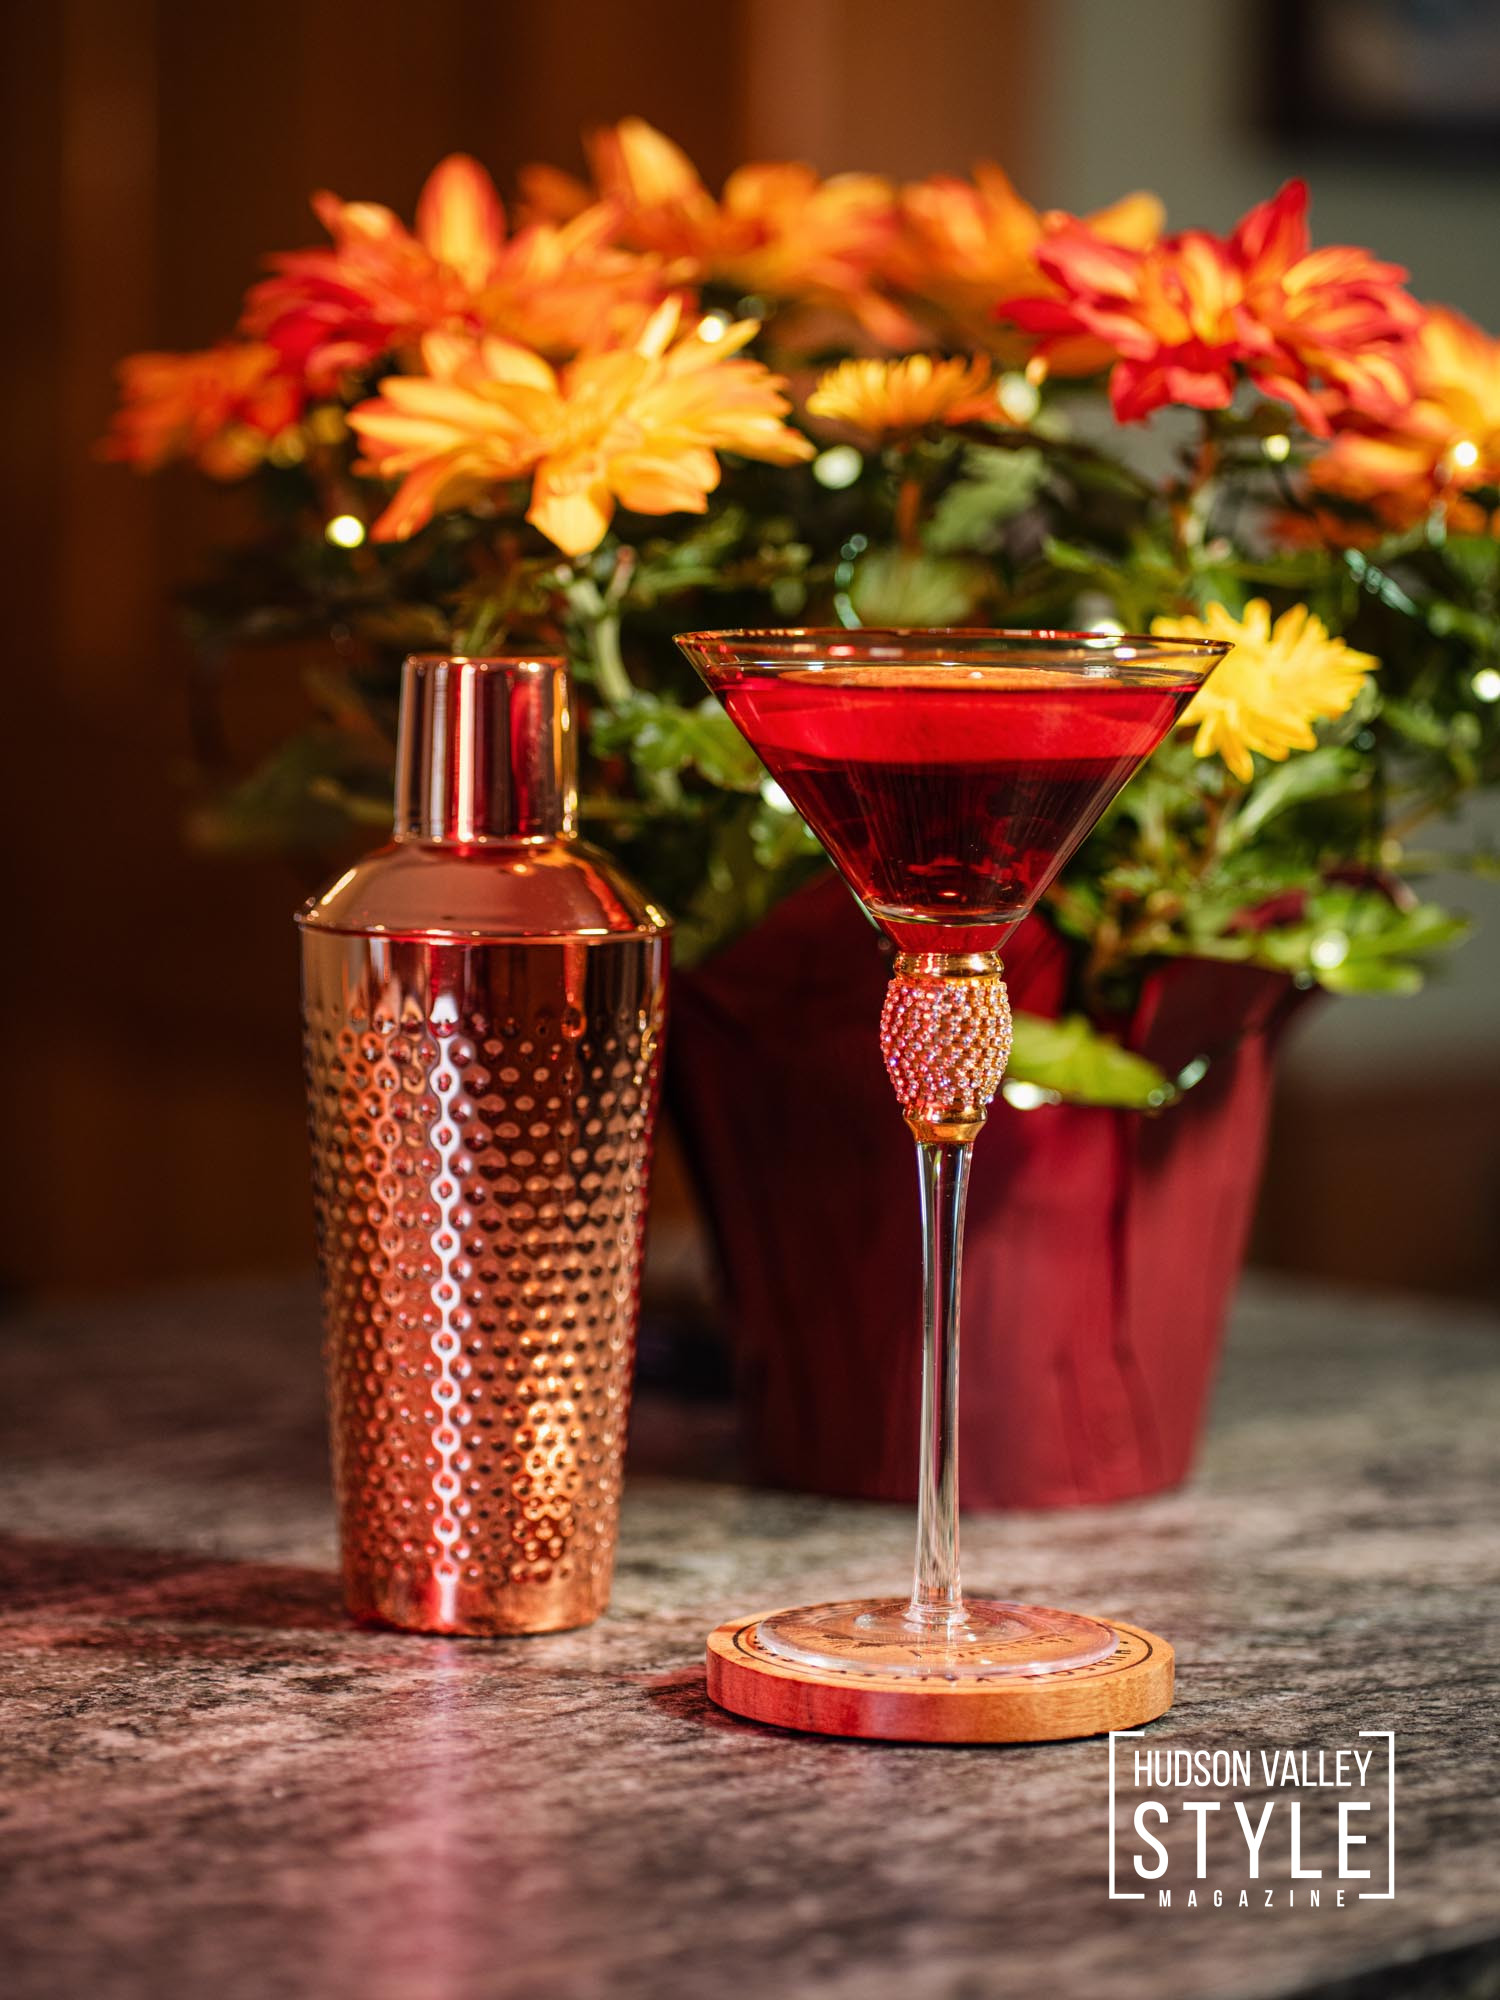 From the Catskills with Love: Maxwell's Ruby Rendezvous Becomes the New Yuletide Classic! – Holiday Mixology with Maxwell Alexander – Presented by Alluvion Vacations